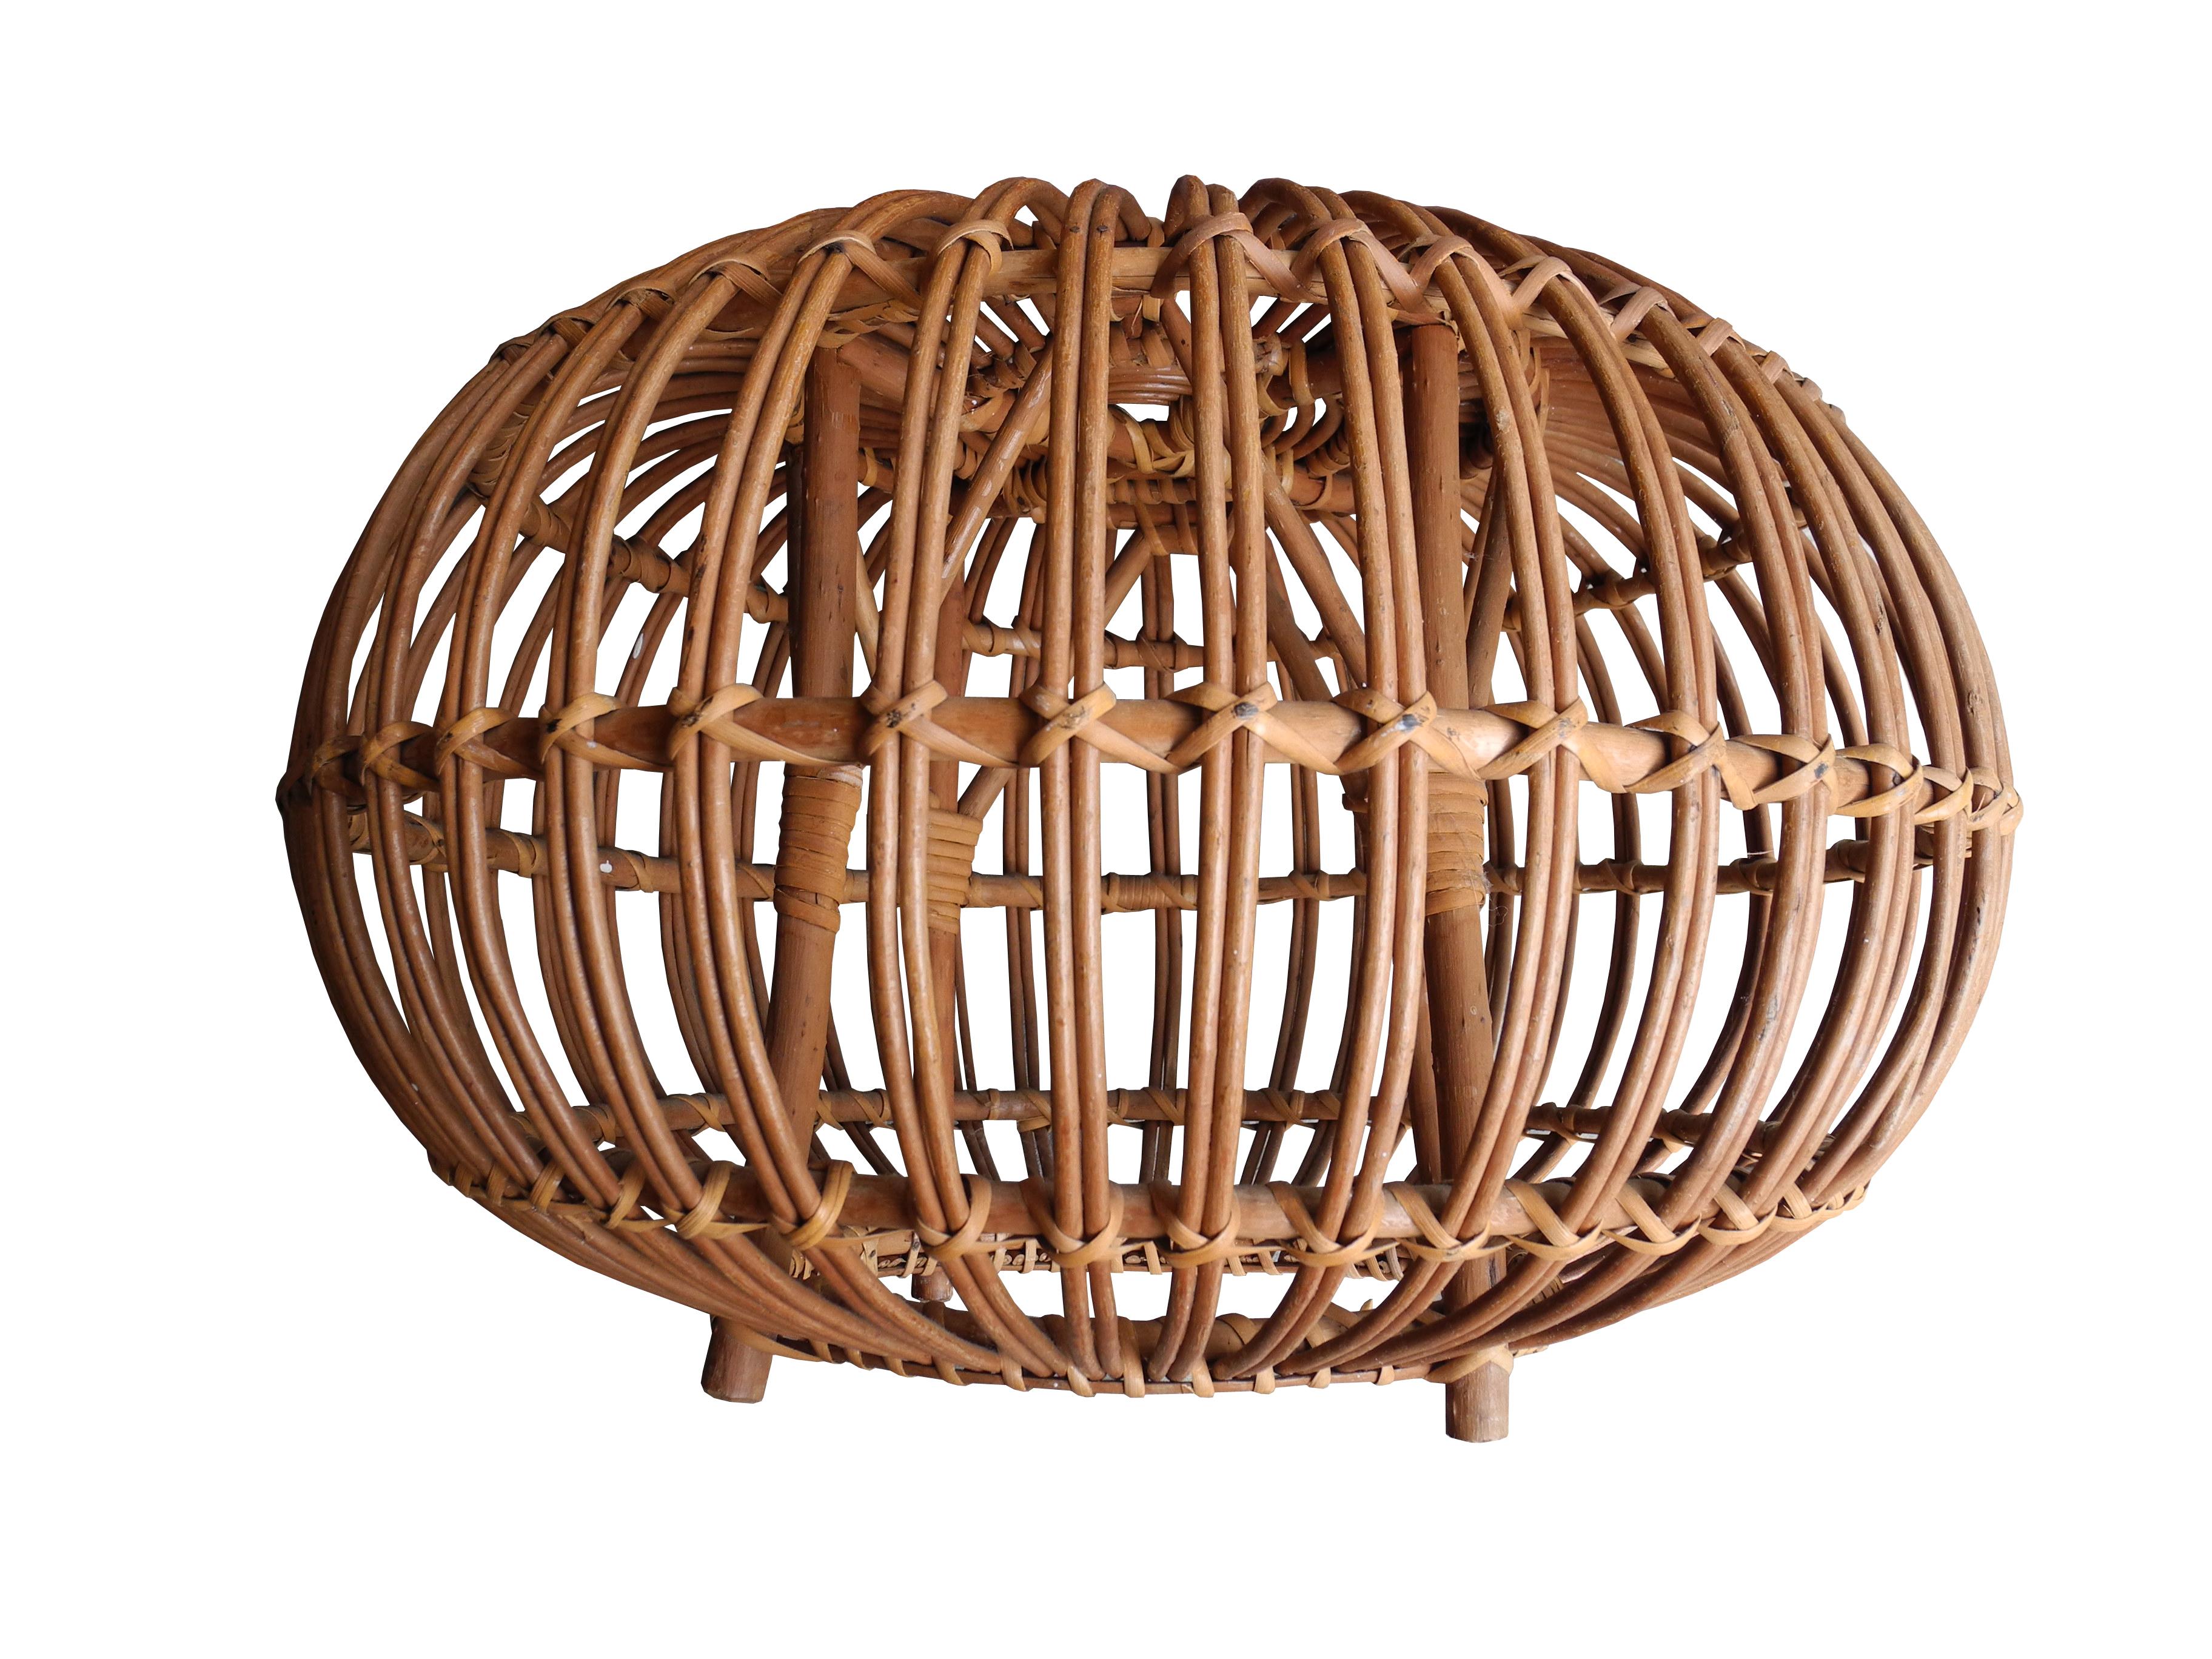 This Mid-20th century pouf was designed by Franco Albini.